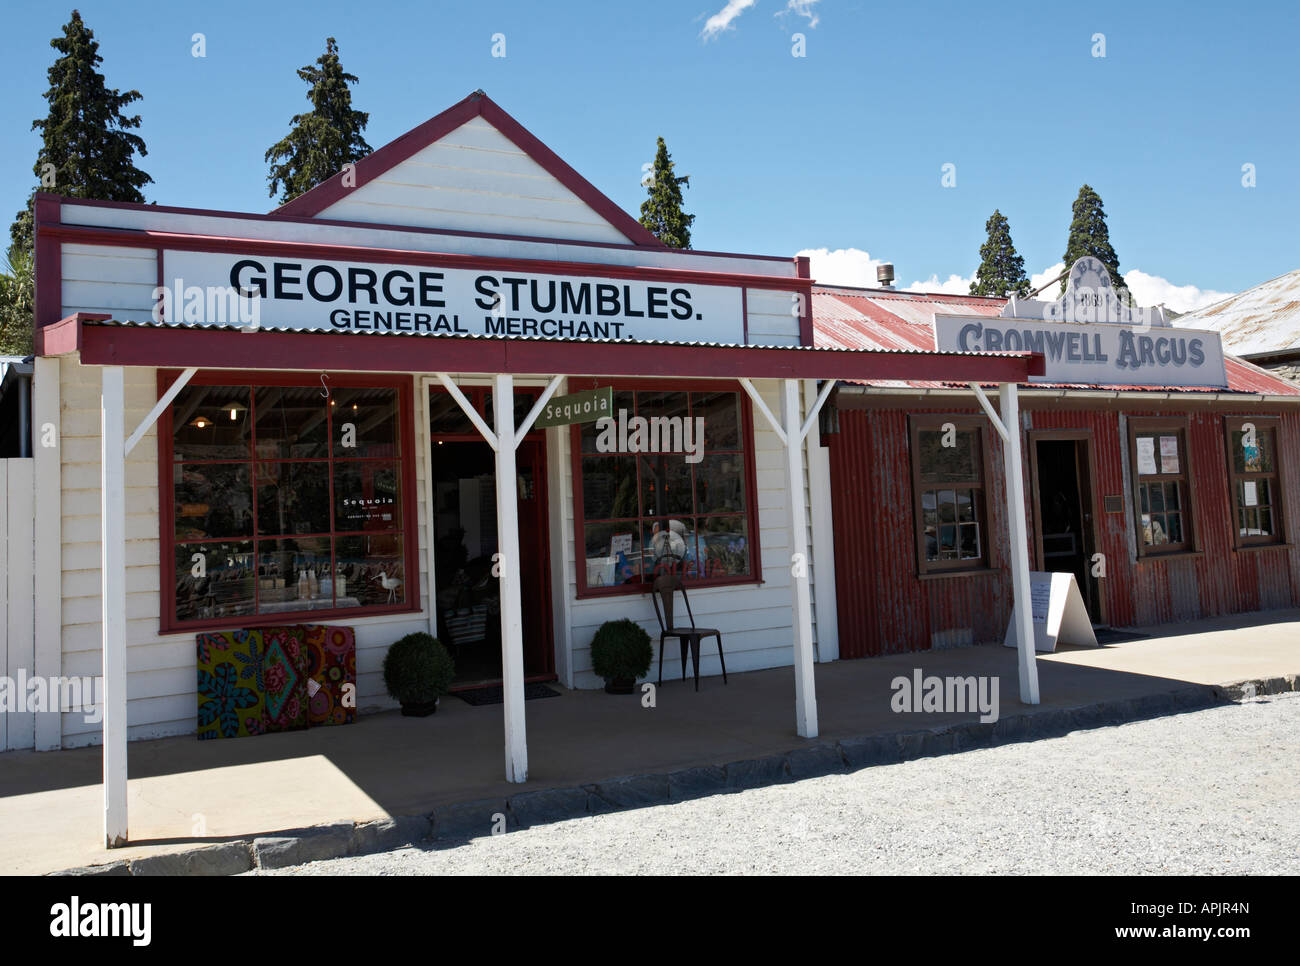 Old Cromwell Town Historic Precinct, Central Otago, South Island, New Zealand Stock Photo